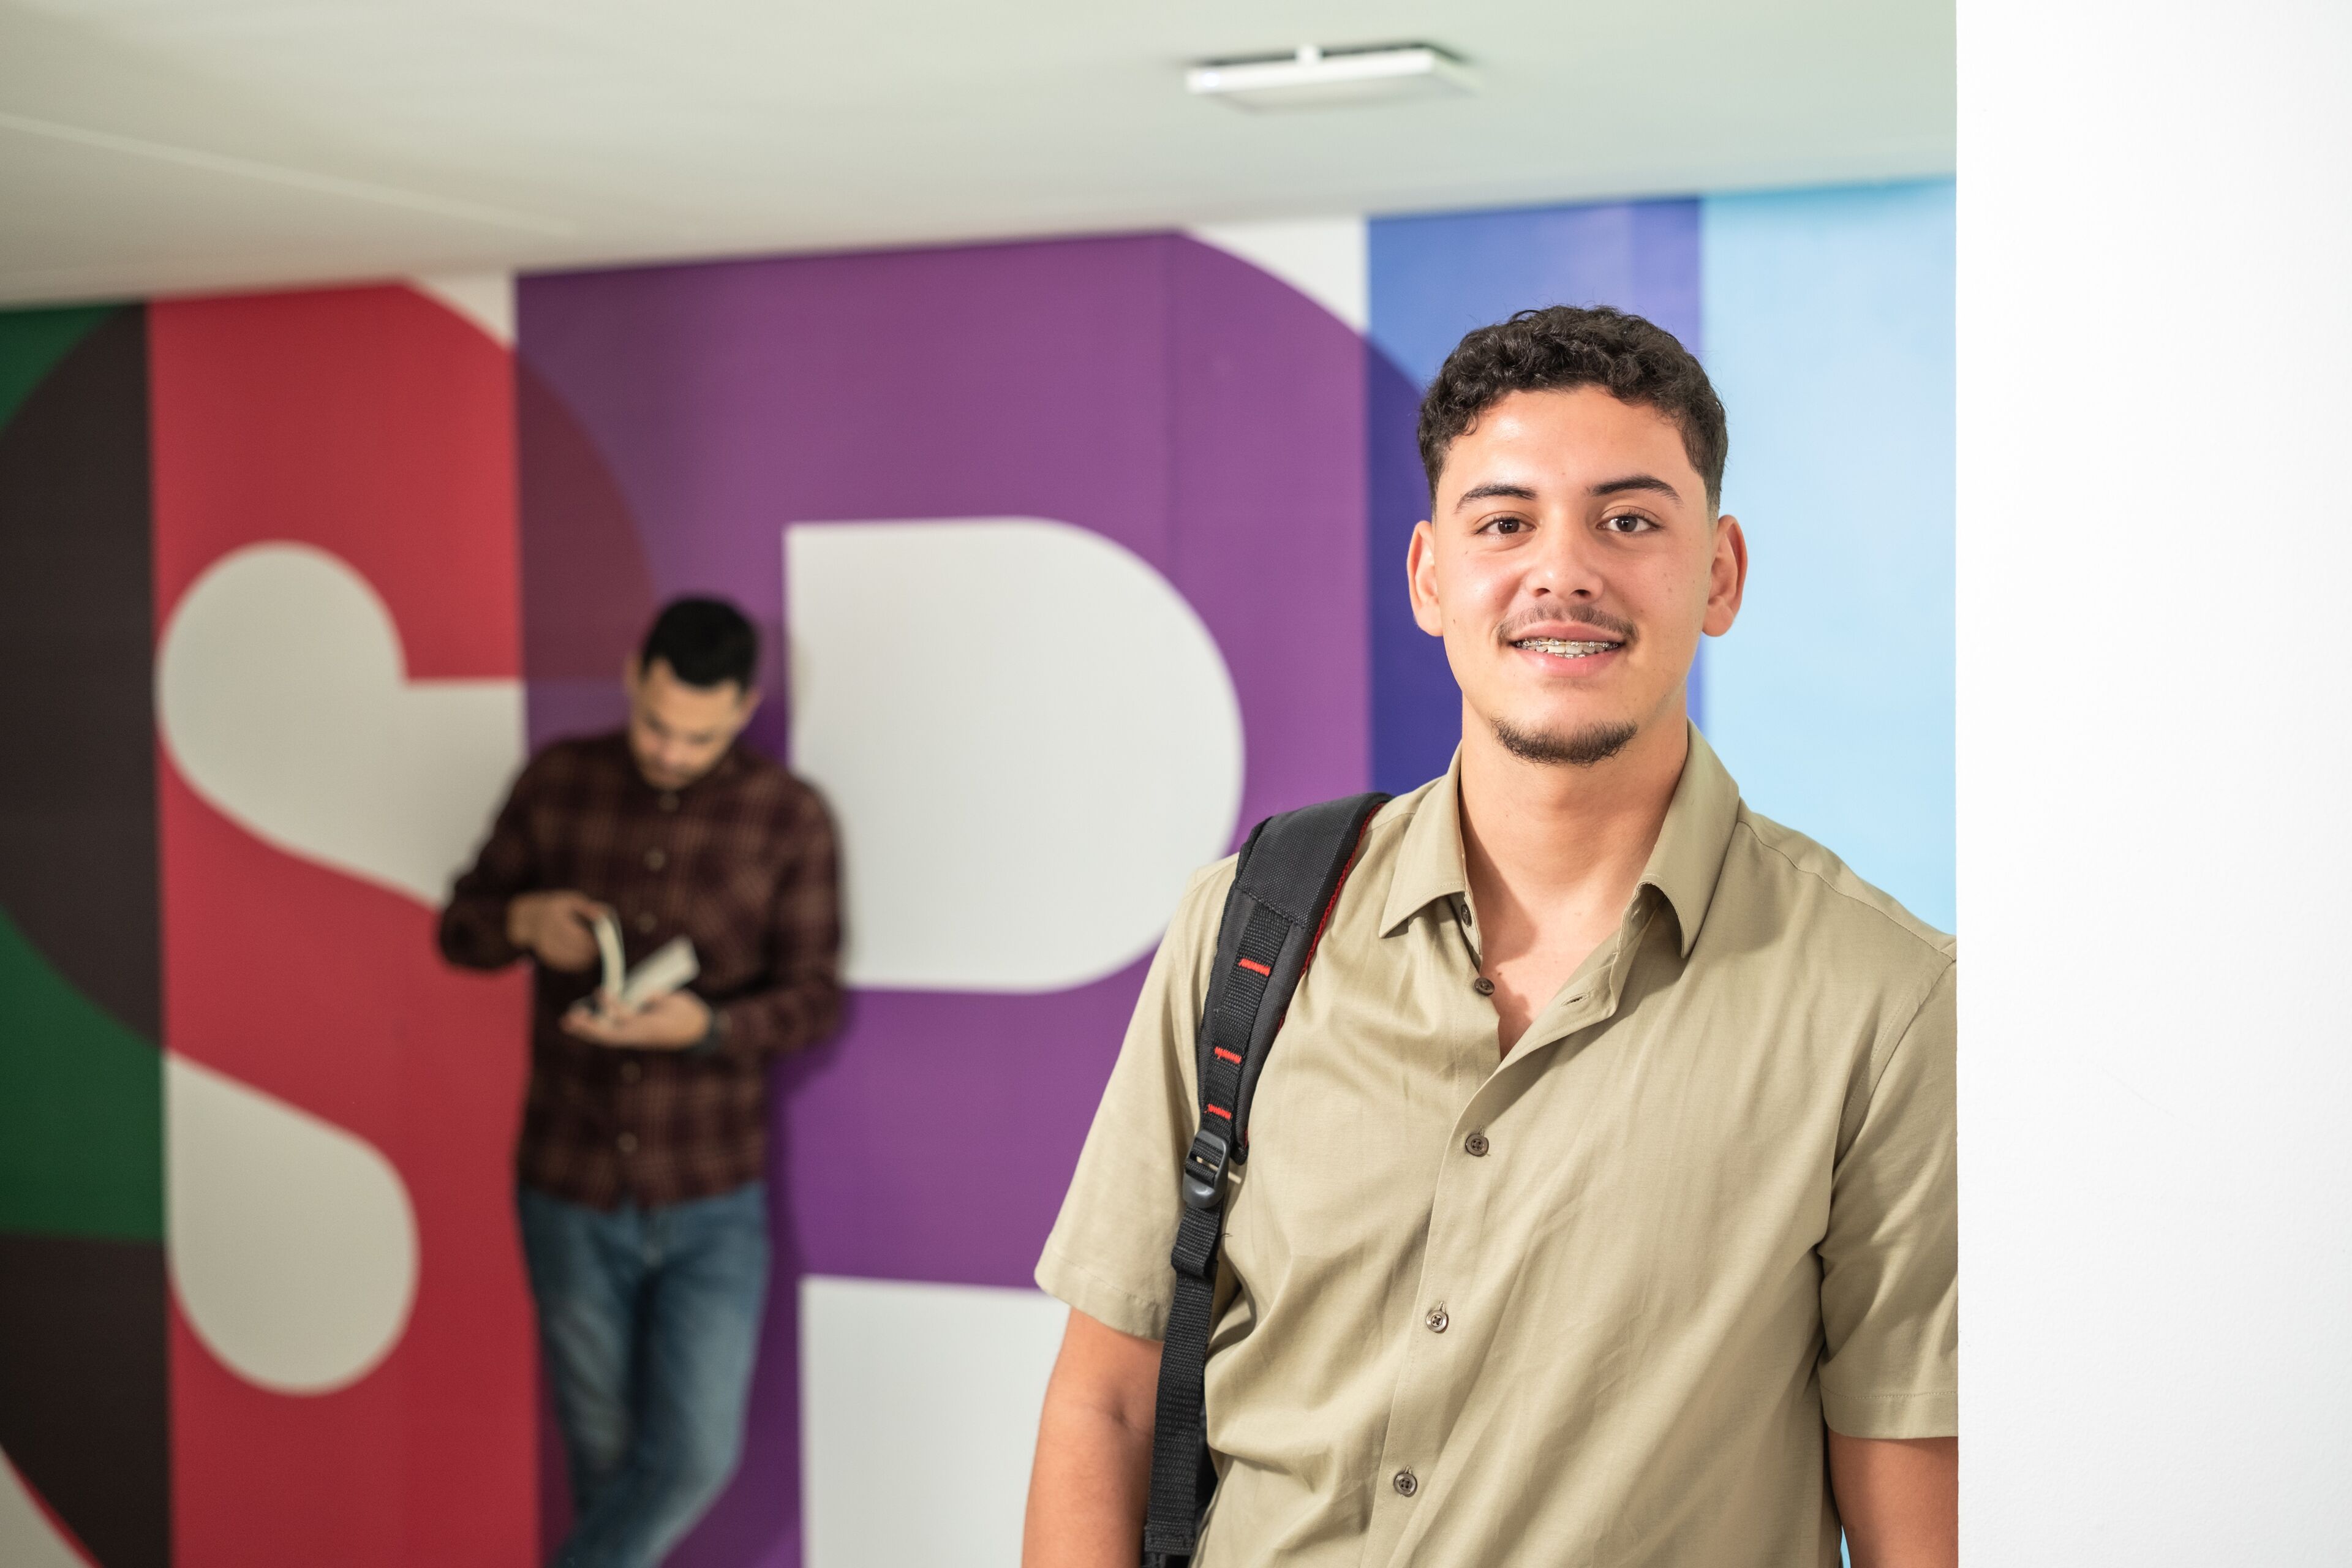 Mouad Erradaf, a student in the Bac+5 Management Program, stands in front of a colorful mural, embodying the vibrant spirit of campus life.